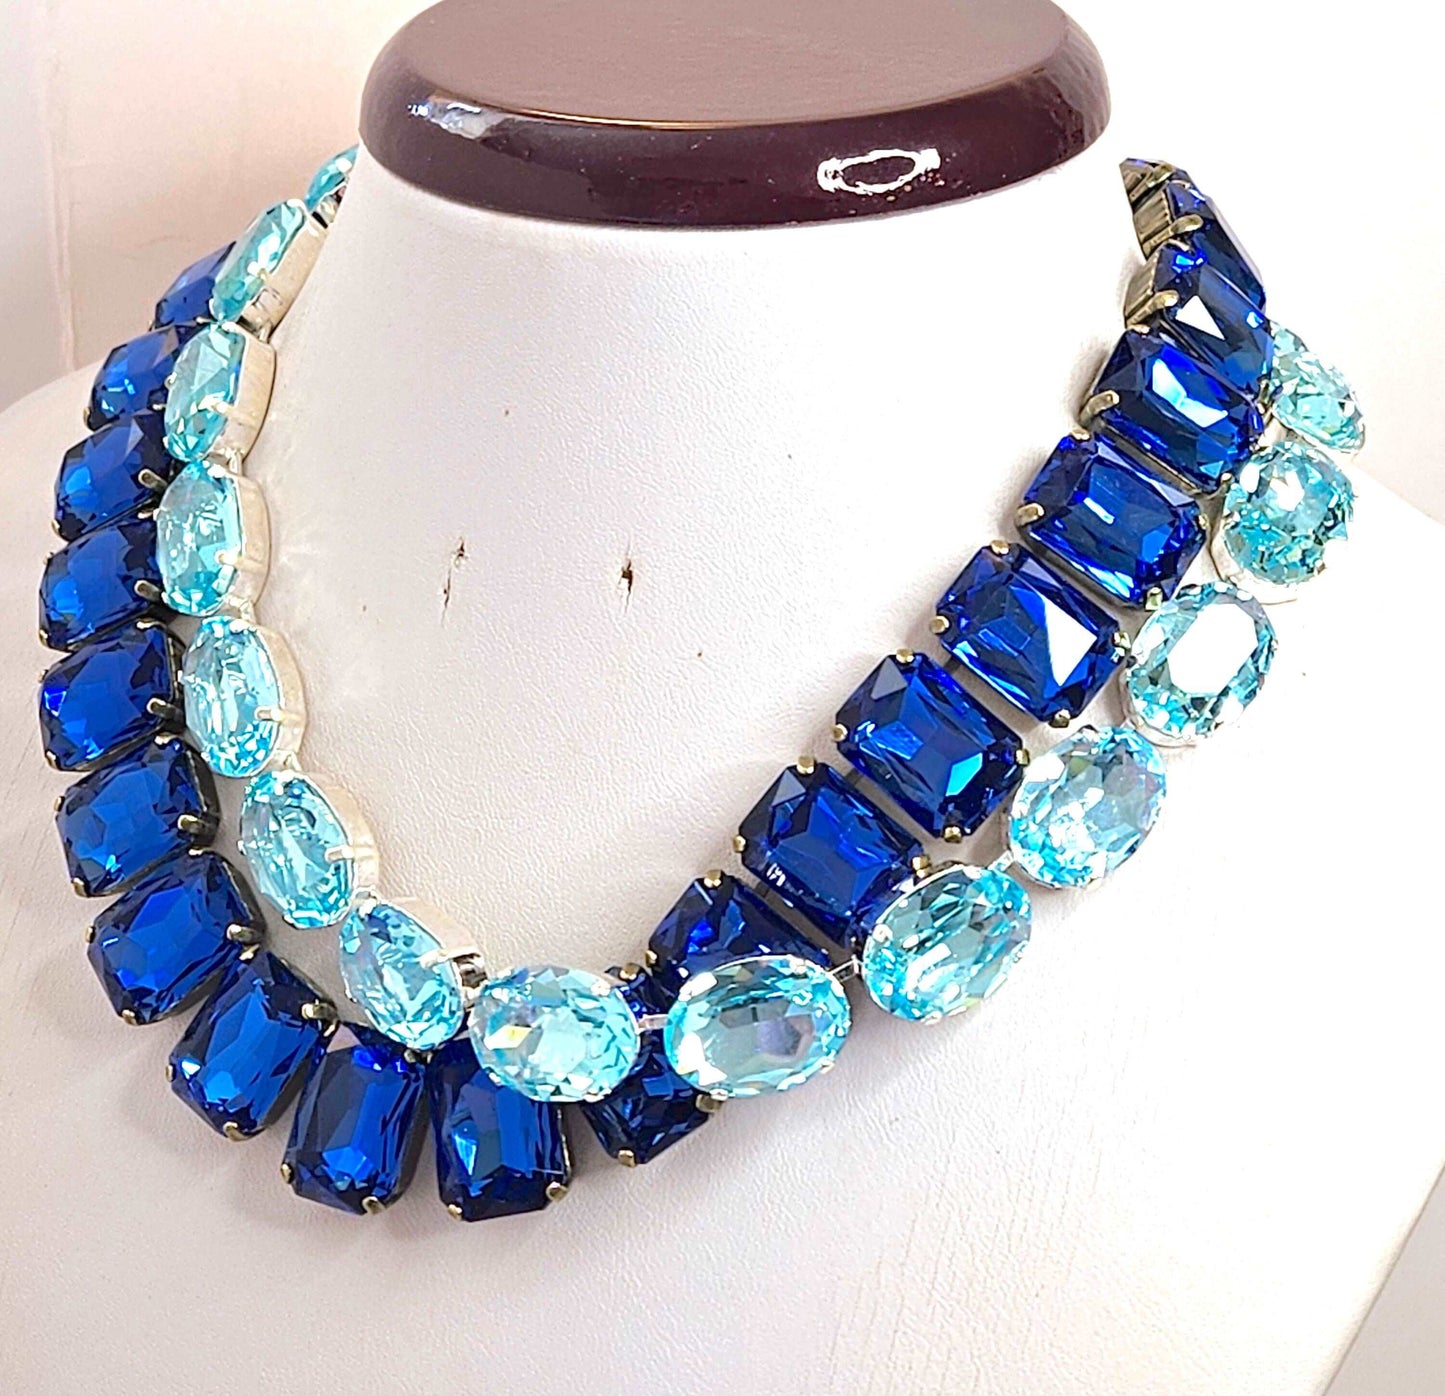 Aquamarine Sapphire Georgian Collet Necklaces, Crystal Chokers, Anna Wintour Style, Blue Riviere Necklace, Statement Necklace for Women